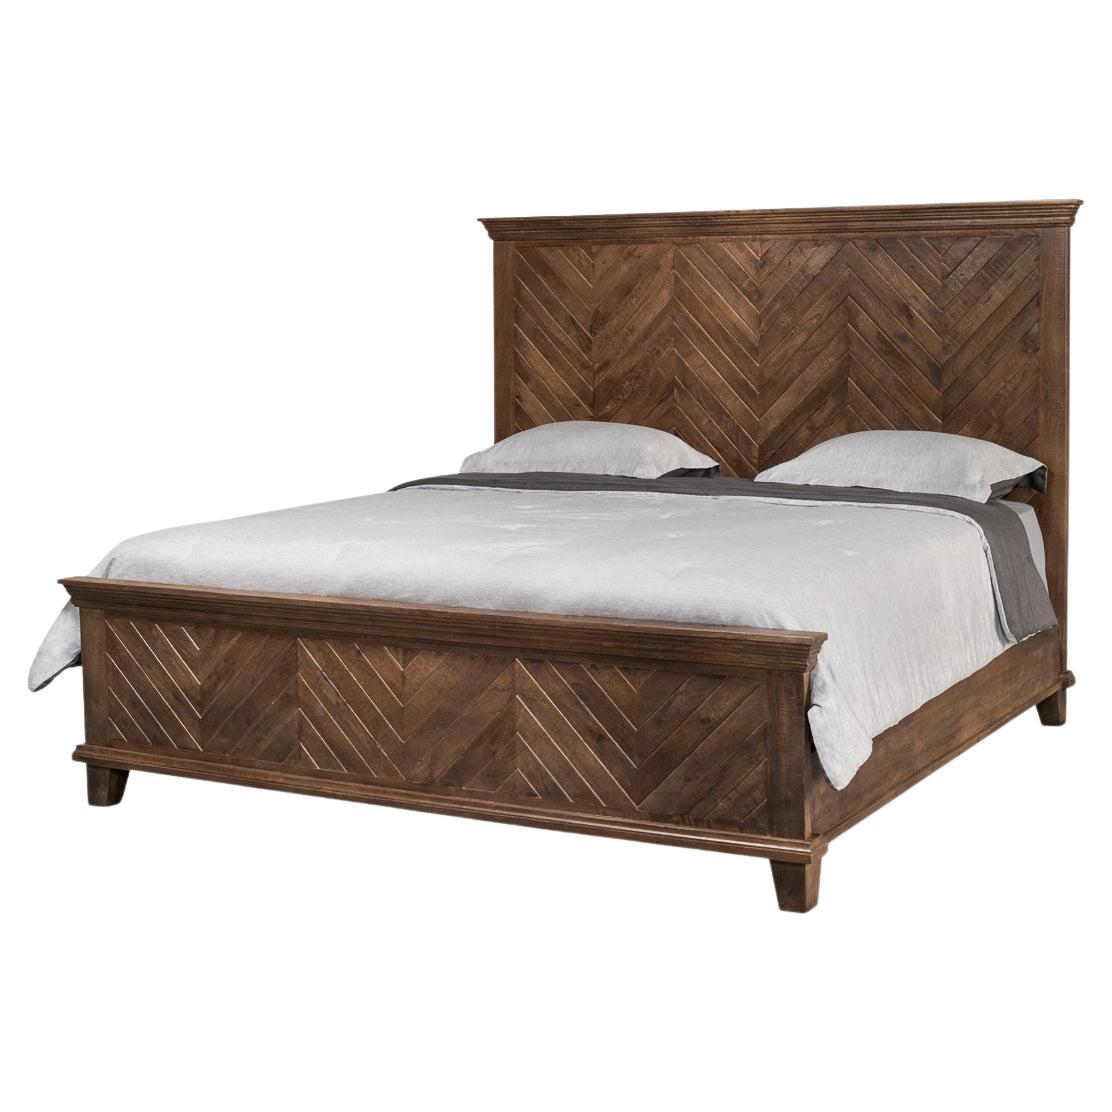 Rustic King Size Bed